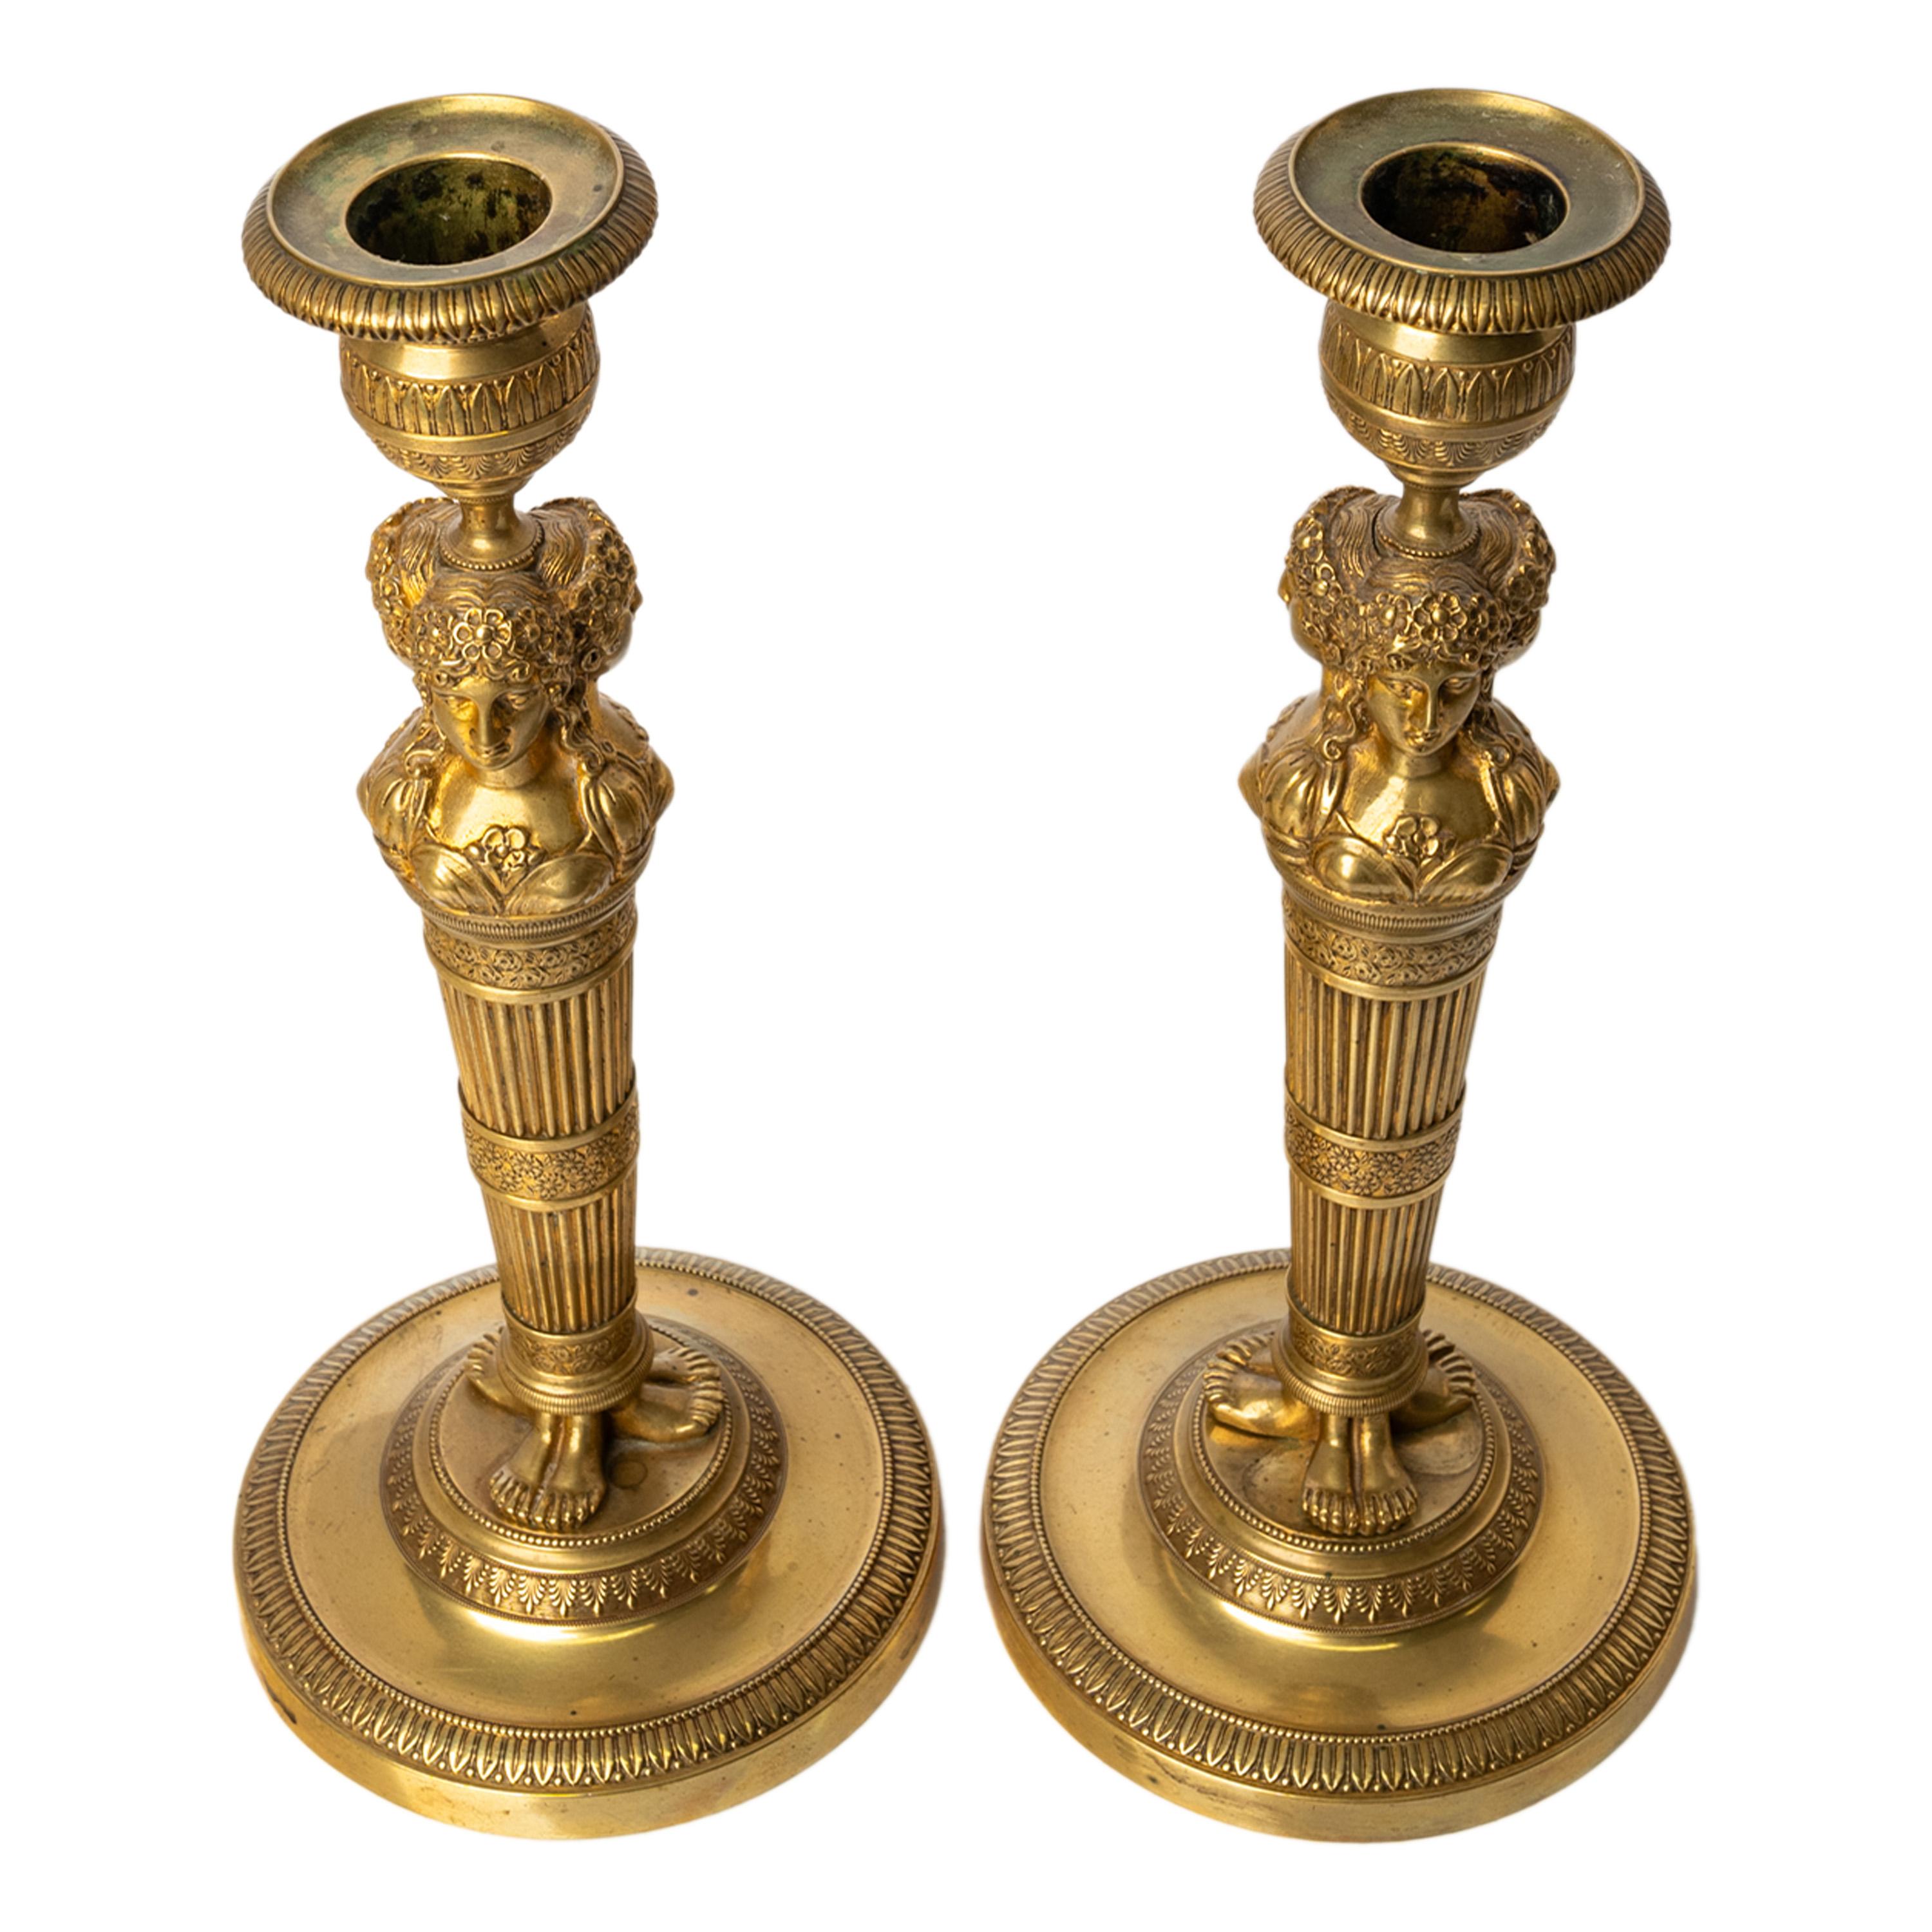 Pair Antique Early 19thC French Empire Neoclassical Gilt Bronze Candlesticks For Sale 2